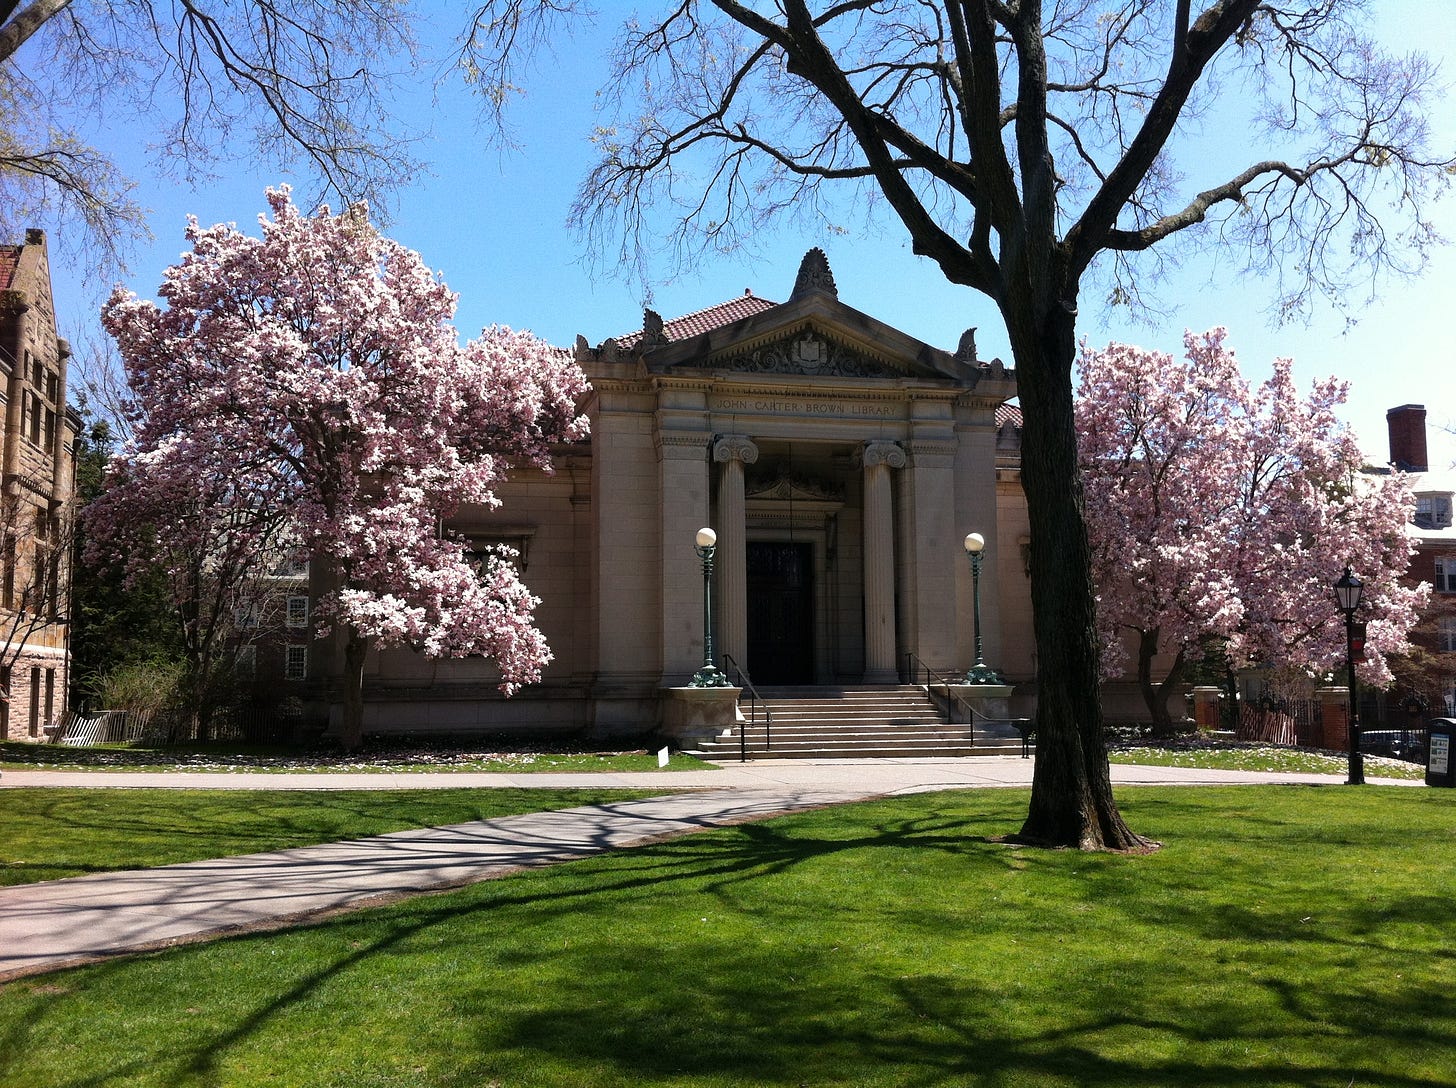 Neoclassical building framed by cherry trees in the background; lawn and leafless trees in the foreground.